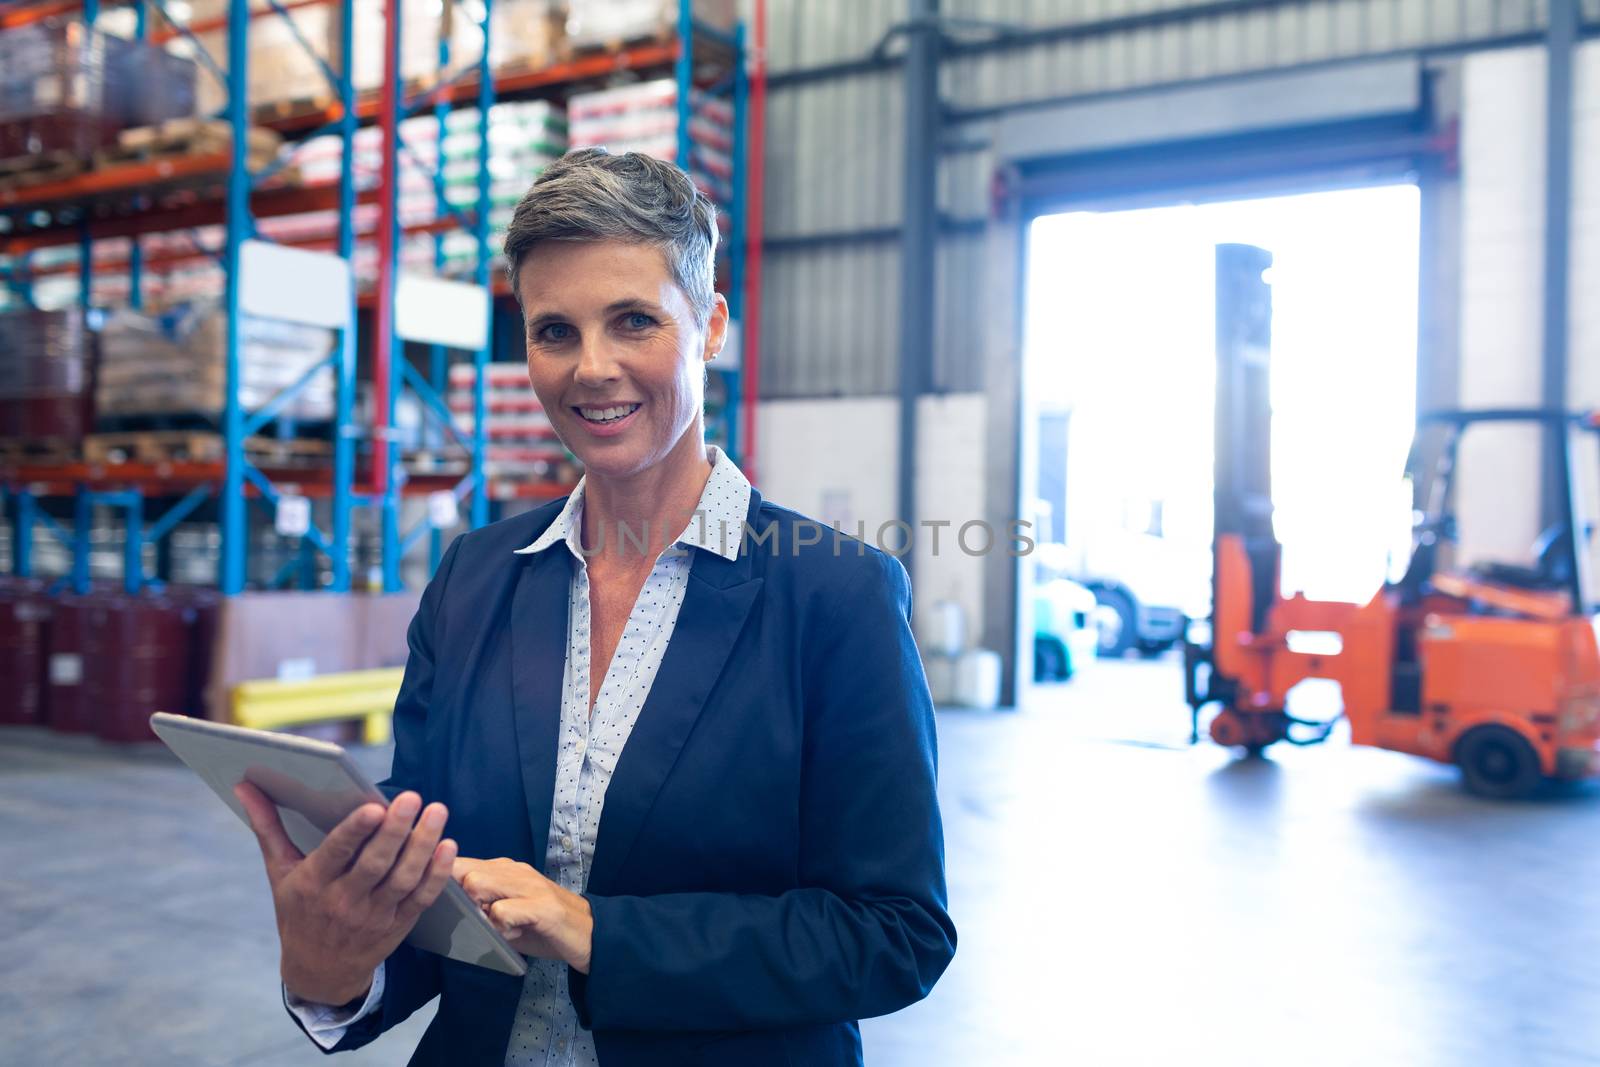 Manager looking at camera while using digital tablet in warehouse by Wavebreakmedia